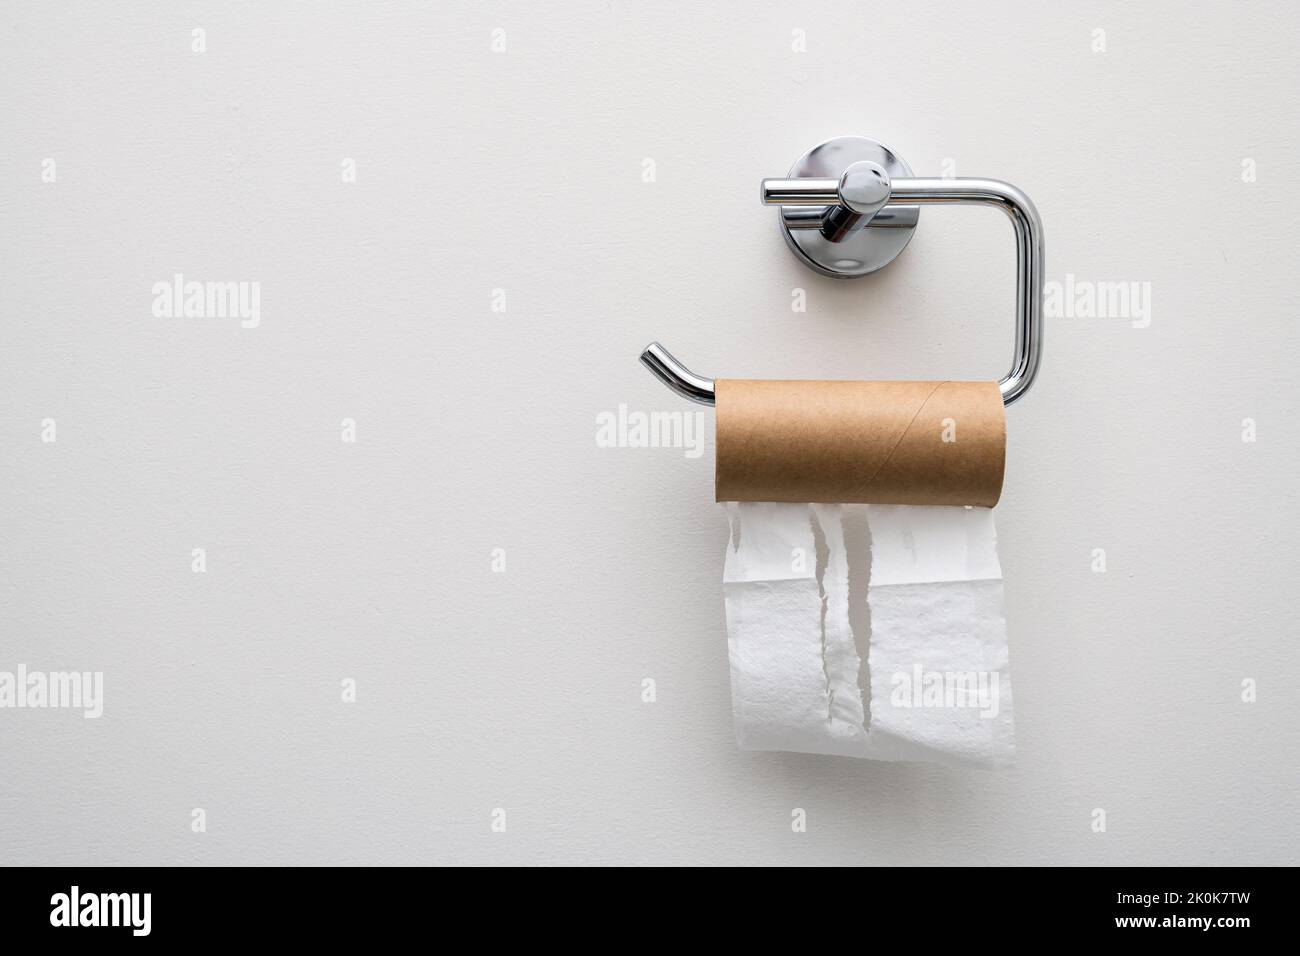 Finished toilet paper empty roll hanging on the wall. Stock Photo